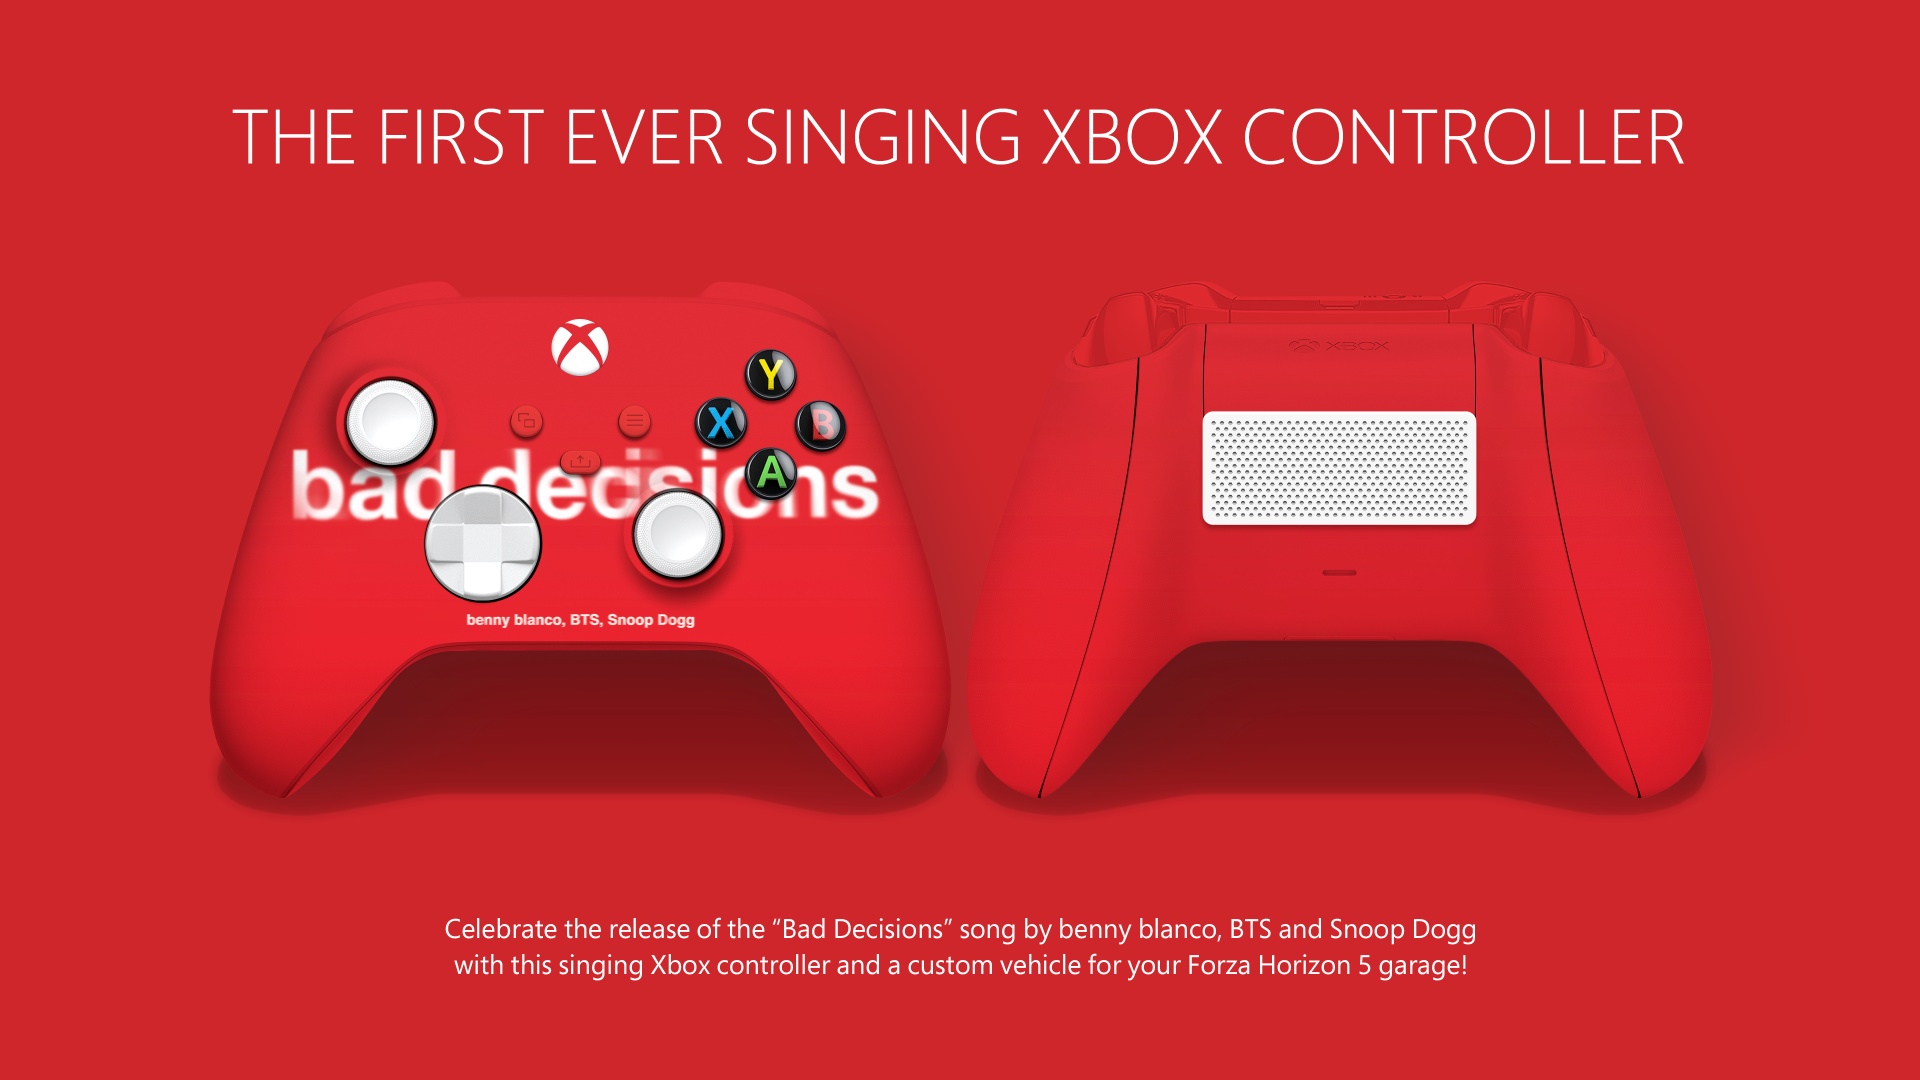 benny blanco, BTS, and Snoop Dogg Reveal First-Ever Xbox Singing Controller